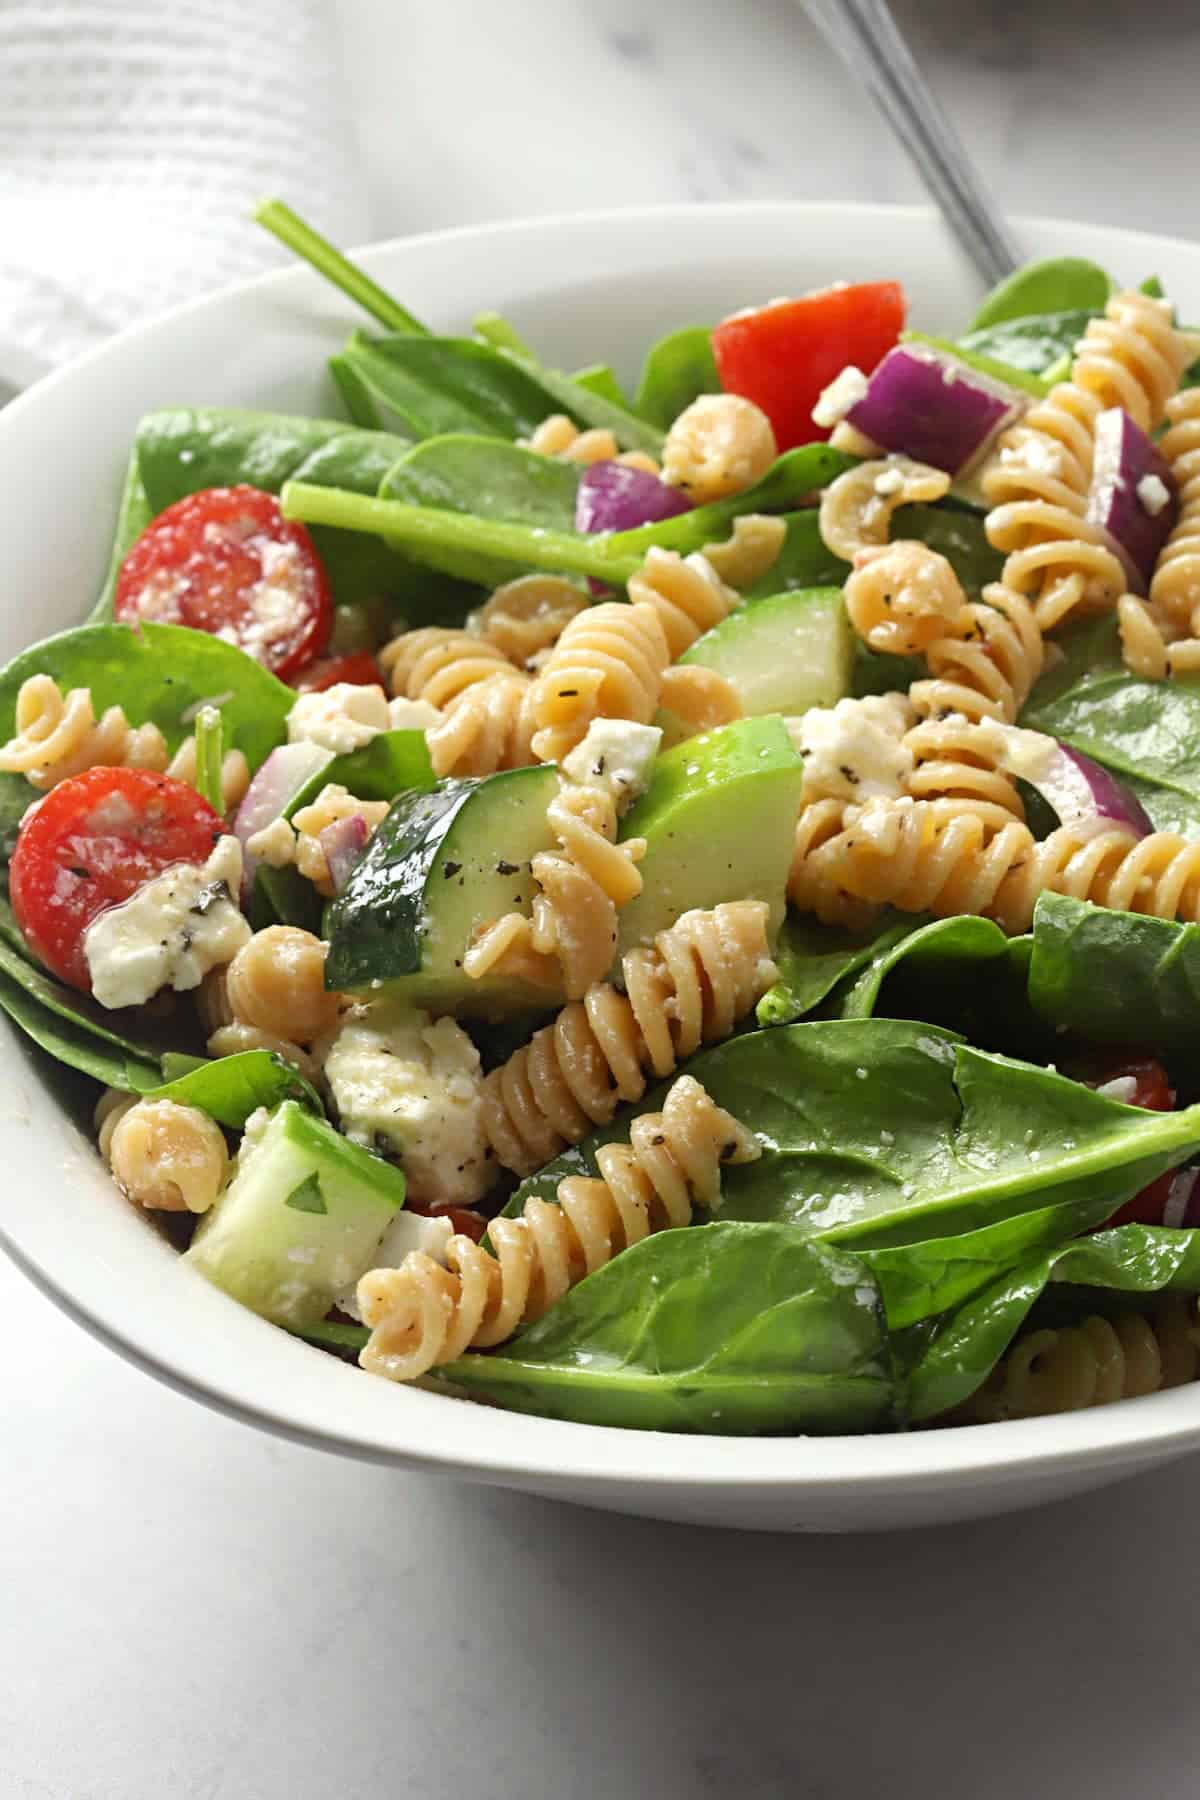 Pasta, cucumber, and tomatoes on top of a bed of spinach in a white bowl.